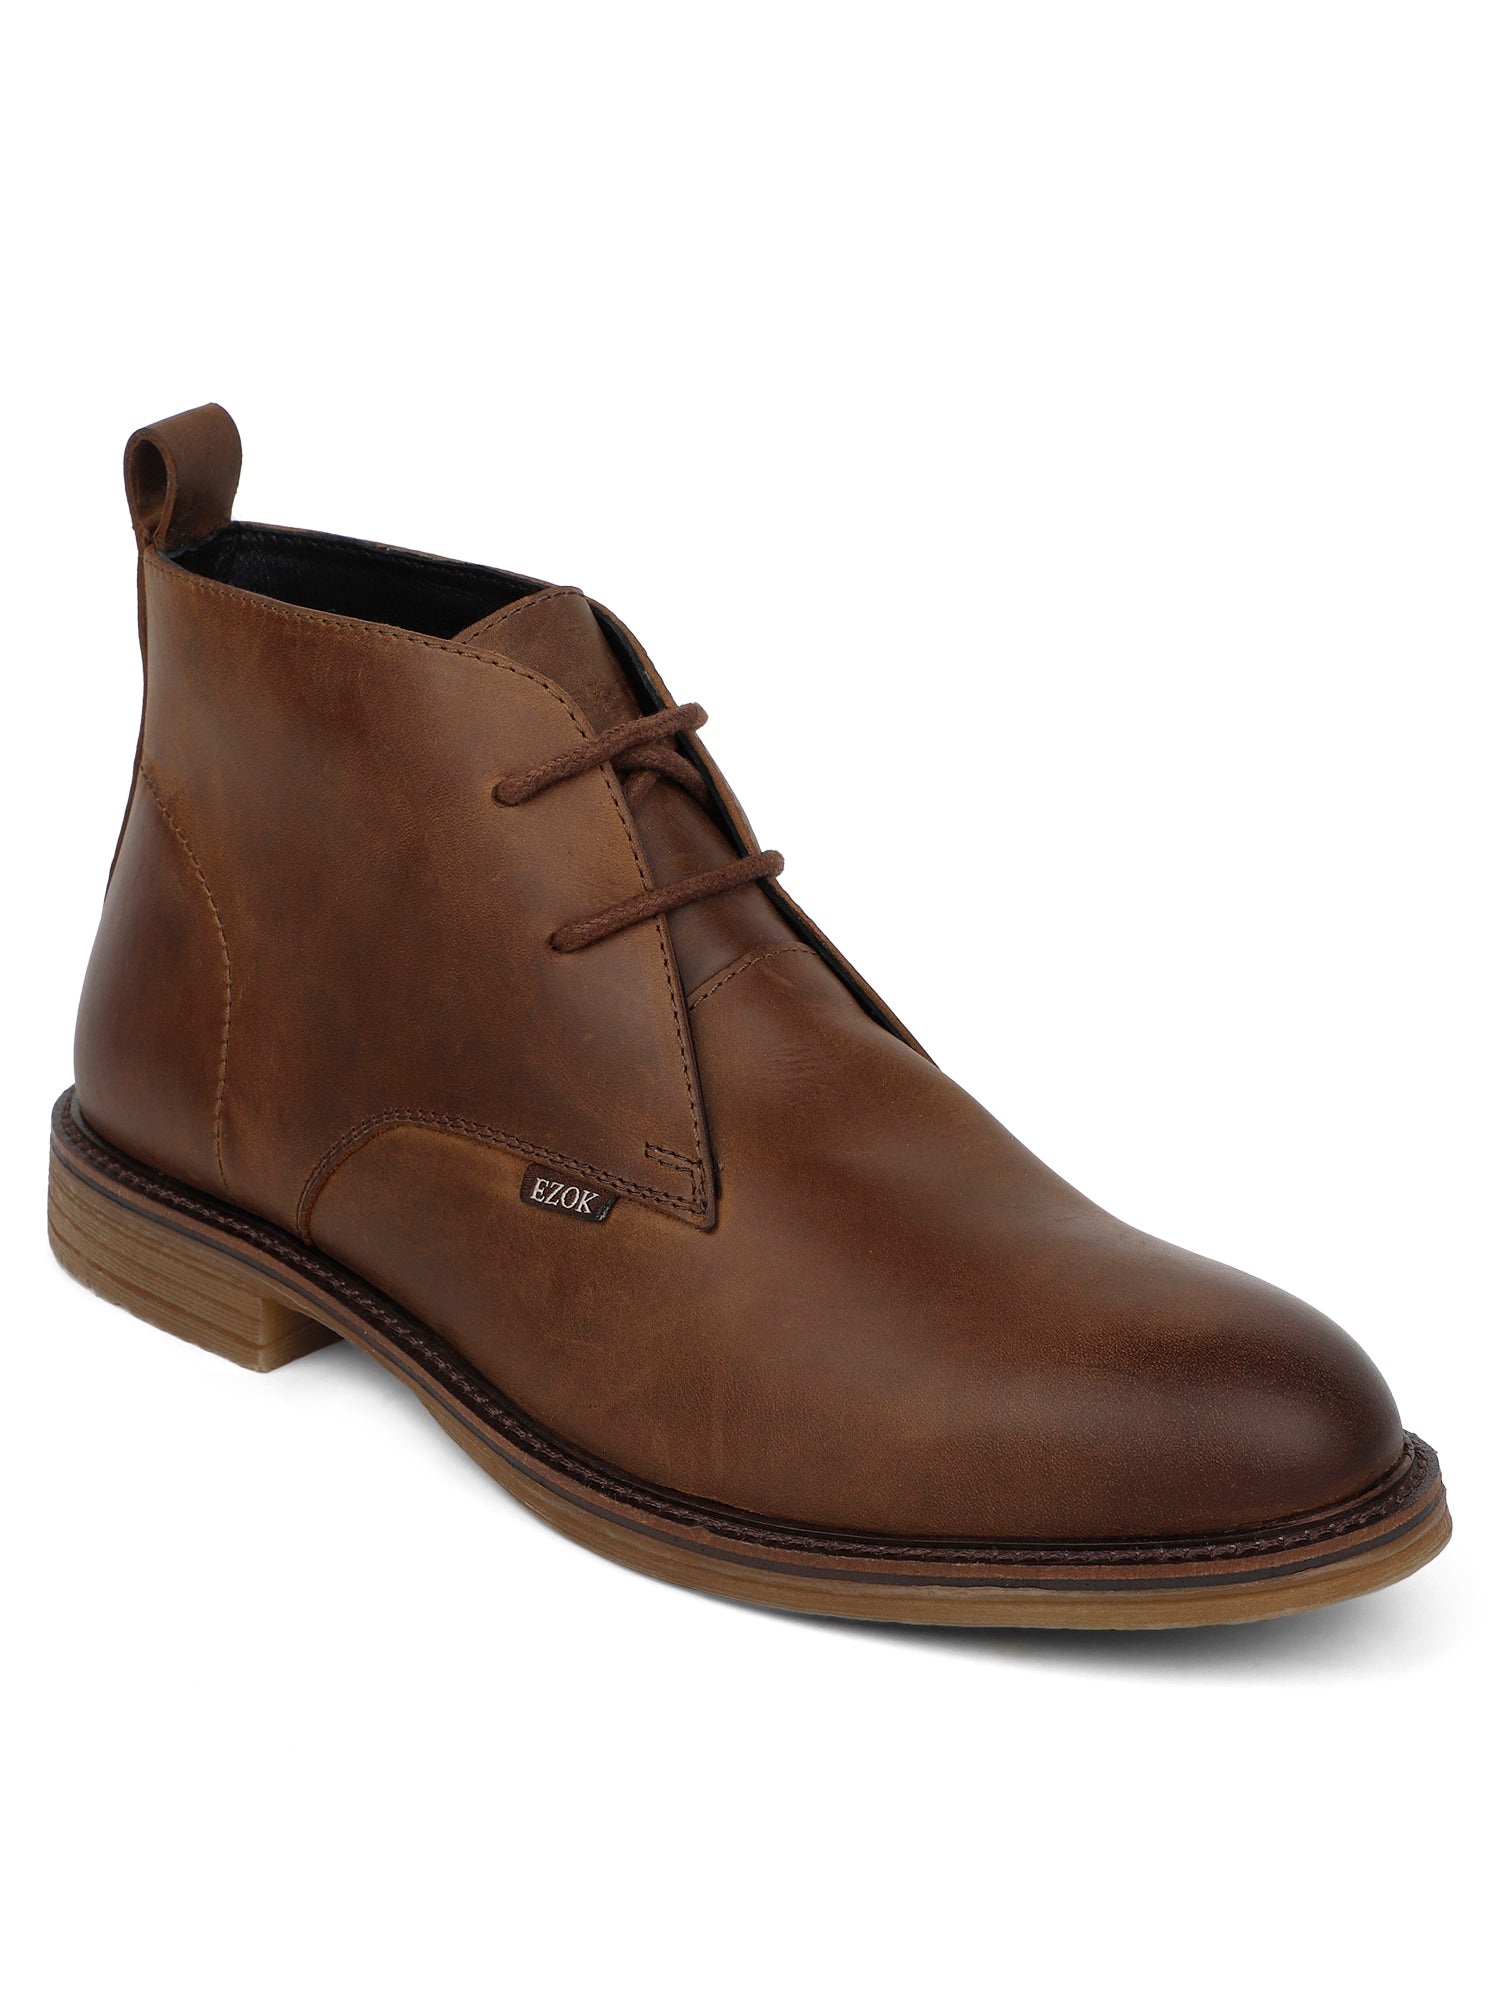 Ezok Brown Stan Boots Casual Shoes